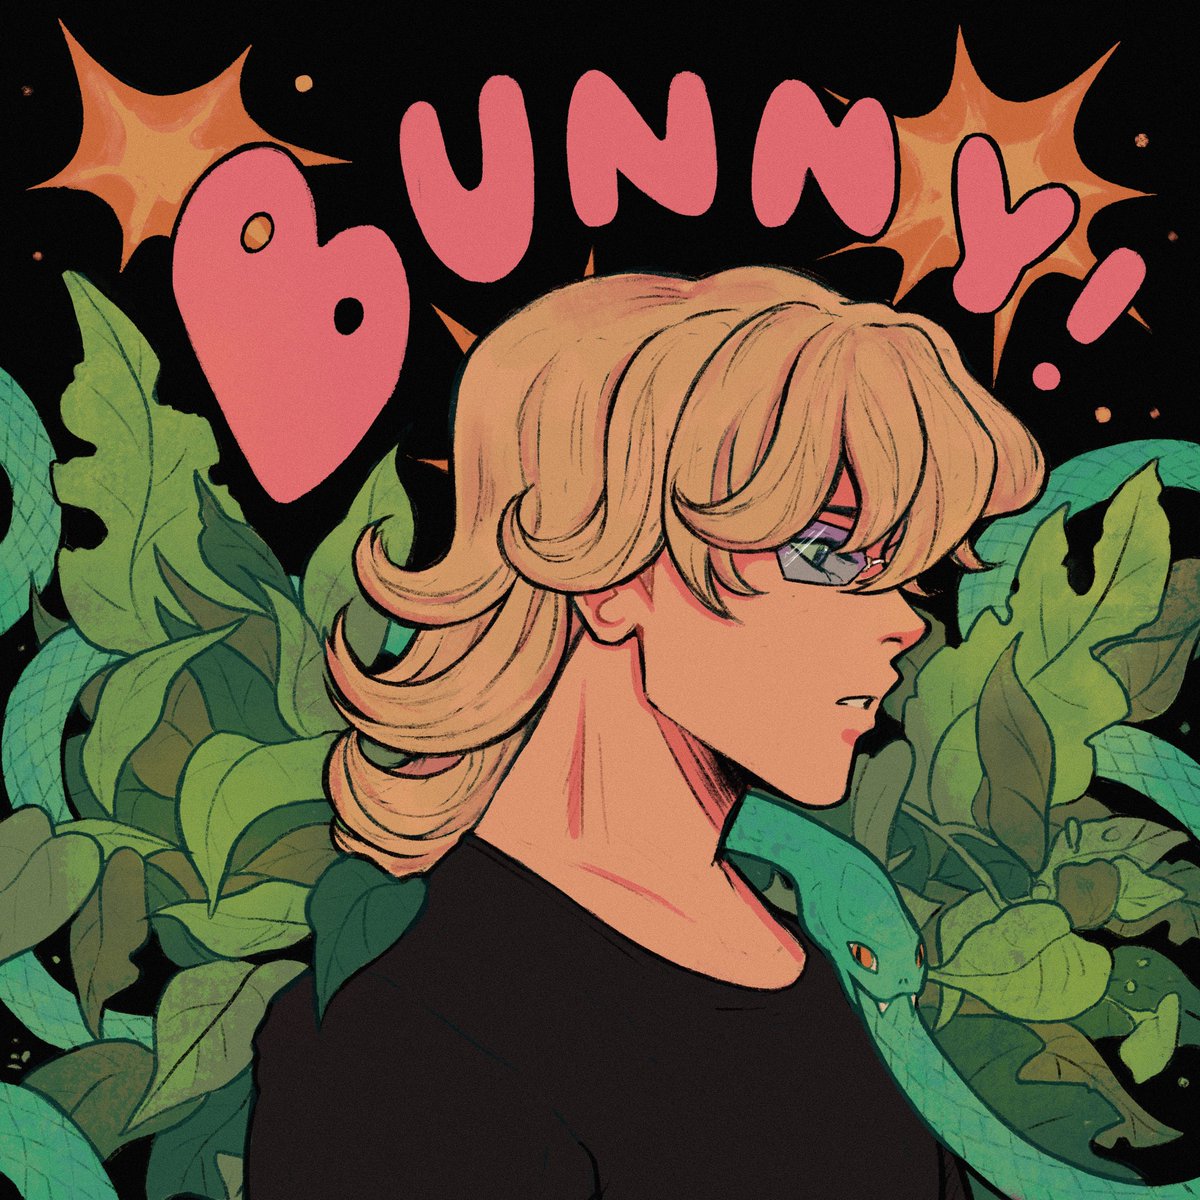 RT @scribblintaylor: started with a spark now we’re on fire #tigerandbunny https://t.co/gBieqGMDd5